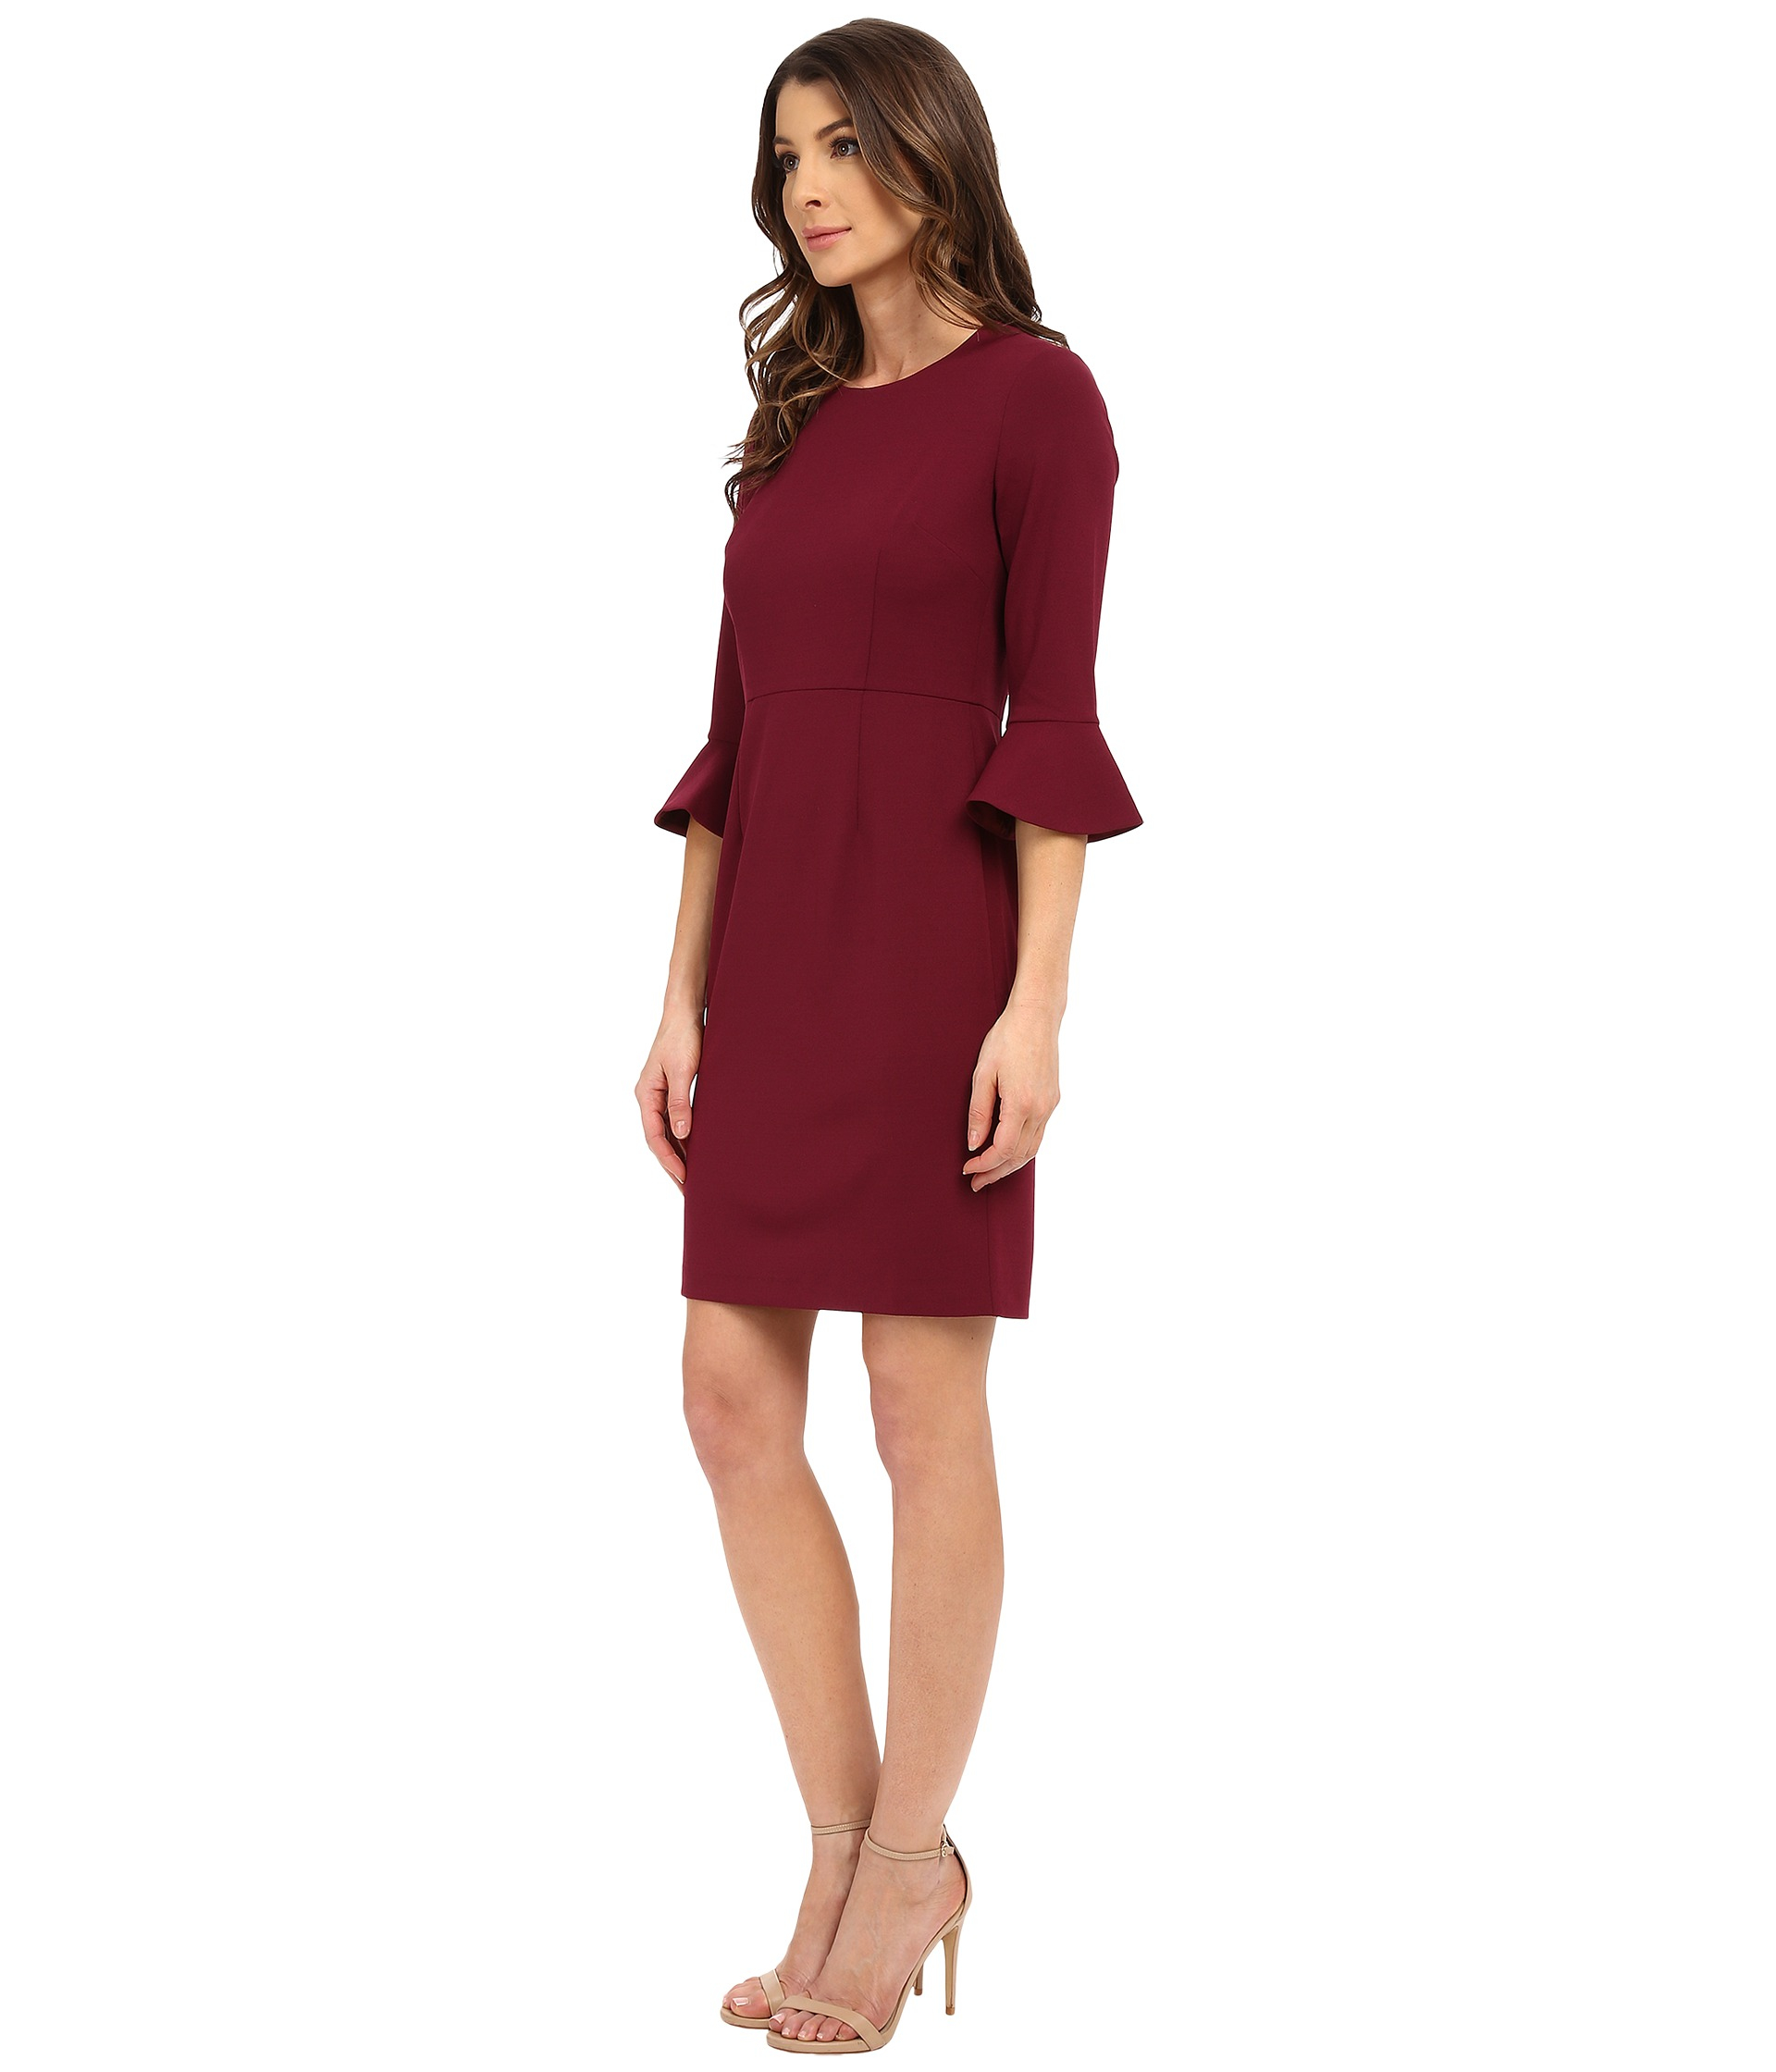 Lyst - Donna Morgan 3/4 Bell Sleeve Crepe Shift Dress in Purple